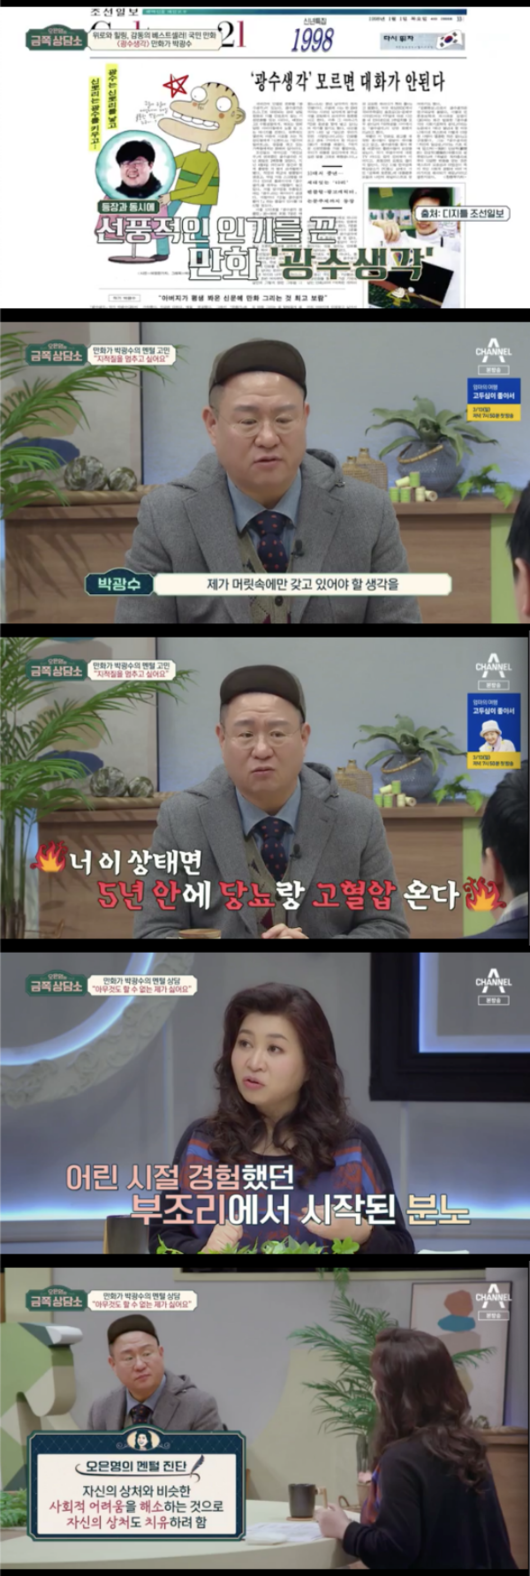 Oh Eun Youngs Gold Counseling Center Park Ye-eun has spoken out about why he cant forgive his father.Singer Hotfeld and cartoonist Park Kwang-soo appeared in the channel A entertainment program Oh Eun-youngs Gold Counseling Center (abbreviatedly the Golden Counseling Center) broadcast on the 11th.Park Kwang-soo said, I keep thinking about what I should have in my head. He said, It is a style that points out to people around me.So it hurts the people around me. I know that I can not fix it. My close junior is a little fat, but I am worried about my health, so I point out that I should take out my weight. I say that I am diabetic and have hypertension in this condition. Oh Eun Young said: Generally, I point out to prove my superiority; the second is that many people who are obsessive about the role of savior also point out.Finally, when my daughter-in-law, who was married, became a mother-in-law, she said.In the meantime, In the case of Park Kwang-soo, the anger that started from the absurdity that he experienced as a child, seems to have not been resolved yet.I think I have made a lot of efforts to change the world through cartoons. He said, It is called sublimation in spirit and terminology.I feel like I have a sense of helplessness and frustration today. Dr. Oh said, I think it is possible to raise the neck sound about absurdity of society.However, it seems that it is the appearance of human Park Kwang-soo to point out steadily as if he painted Gwangsu idea which is not a fugitive but a natural feeling. Park Ye-eun said: My father is in prison for fraud, its been about five years.Now I have erased my fathers existence in my life, and people around me say forgive me. But I think there are things that I should not be forgiven in the world. Asked by Dr. Oh, Do you have a way to live? Park Ye-eun said, I honestly thought that I wanted to die at the time.I started listening to music because I didnt want to hear the fighting sound. Music is a healing for me, Confessions said.Ive been playing music and recounting my feelings, I feel really comfortable organizing a lot of feelings, Park Ye-eun laughed, with Oh Eun Young saying, You did a good job.Its not that the hard feelings are solved right away, but if youre very careful and hate your father, you dont have to try to get them out quickly.Even if you hate your father, Mr. Park Ye-eun is not a bad person.I do not want to raise my hate mind, but I have to feel it enough and think about it, and my feelings become digestive as food digestion. If you try to send it out quickly, your feelings will not be resolved. In that sense, you do not have to forgive your father right now.Dr. Oh said, I hope that this broadcast will clearly draw a line and declare it. I must say that it is my biological father, but it has nothing to do with me.If something happens and you do not want to hate your father more because of it, you should. Dr. Oh Eun Young said, It is okay to cry. Even if you hate your father, Park Ye-eun is not a bad person.Channel A Gold Counseling Center screen capture